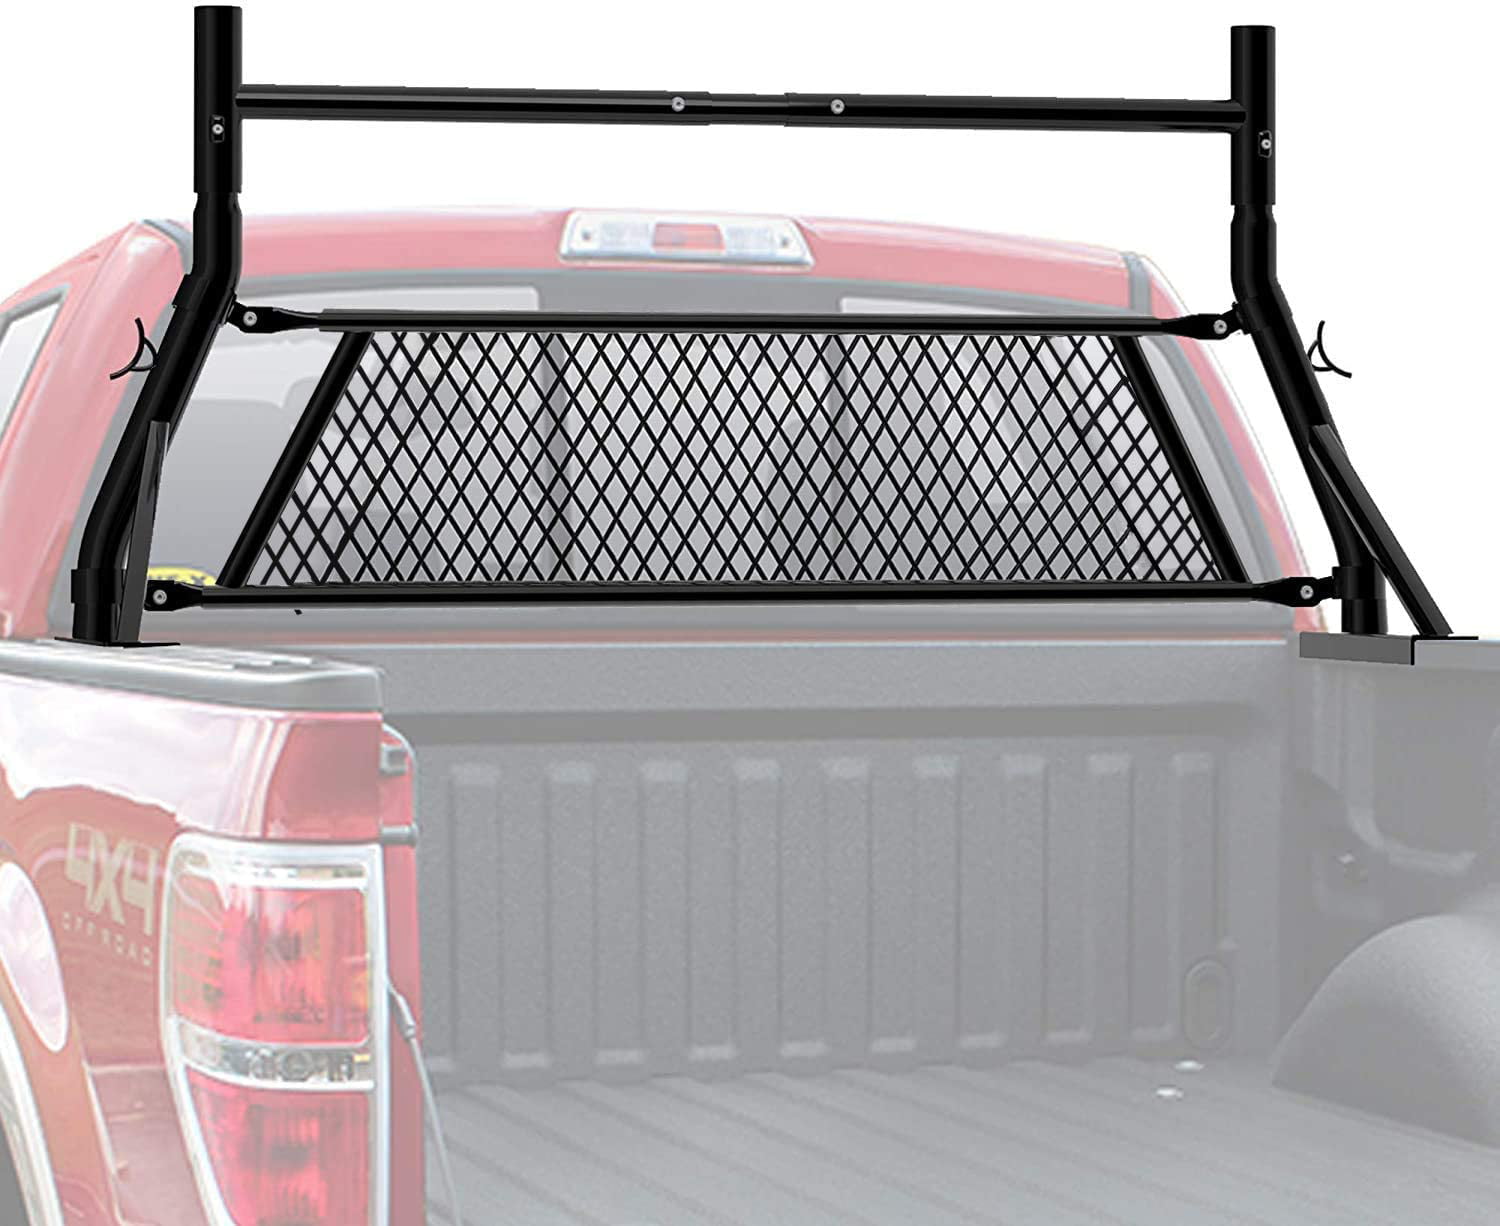 TMS 800Ibs Non Drilling Extendable Steel Universal Pickup Truck Ladder Rack Low Profile Sport Bar with Removable Window Protector Headache Rack and Mounting Clamps Lumber Utility 2 Bar Set 24 